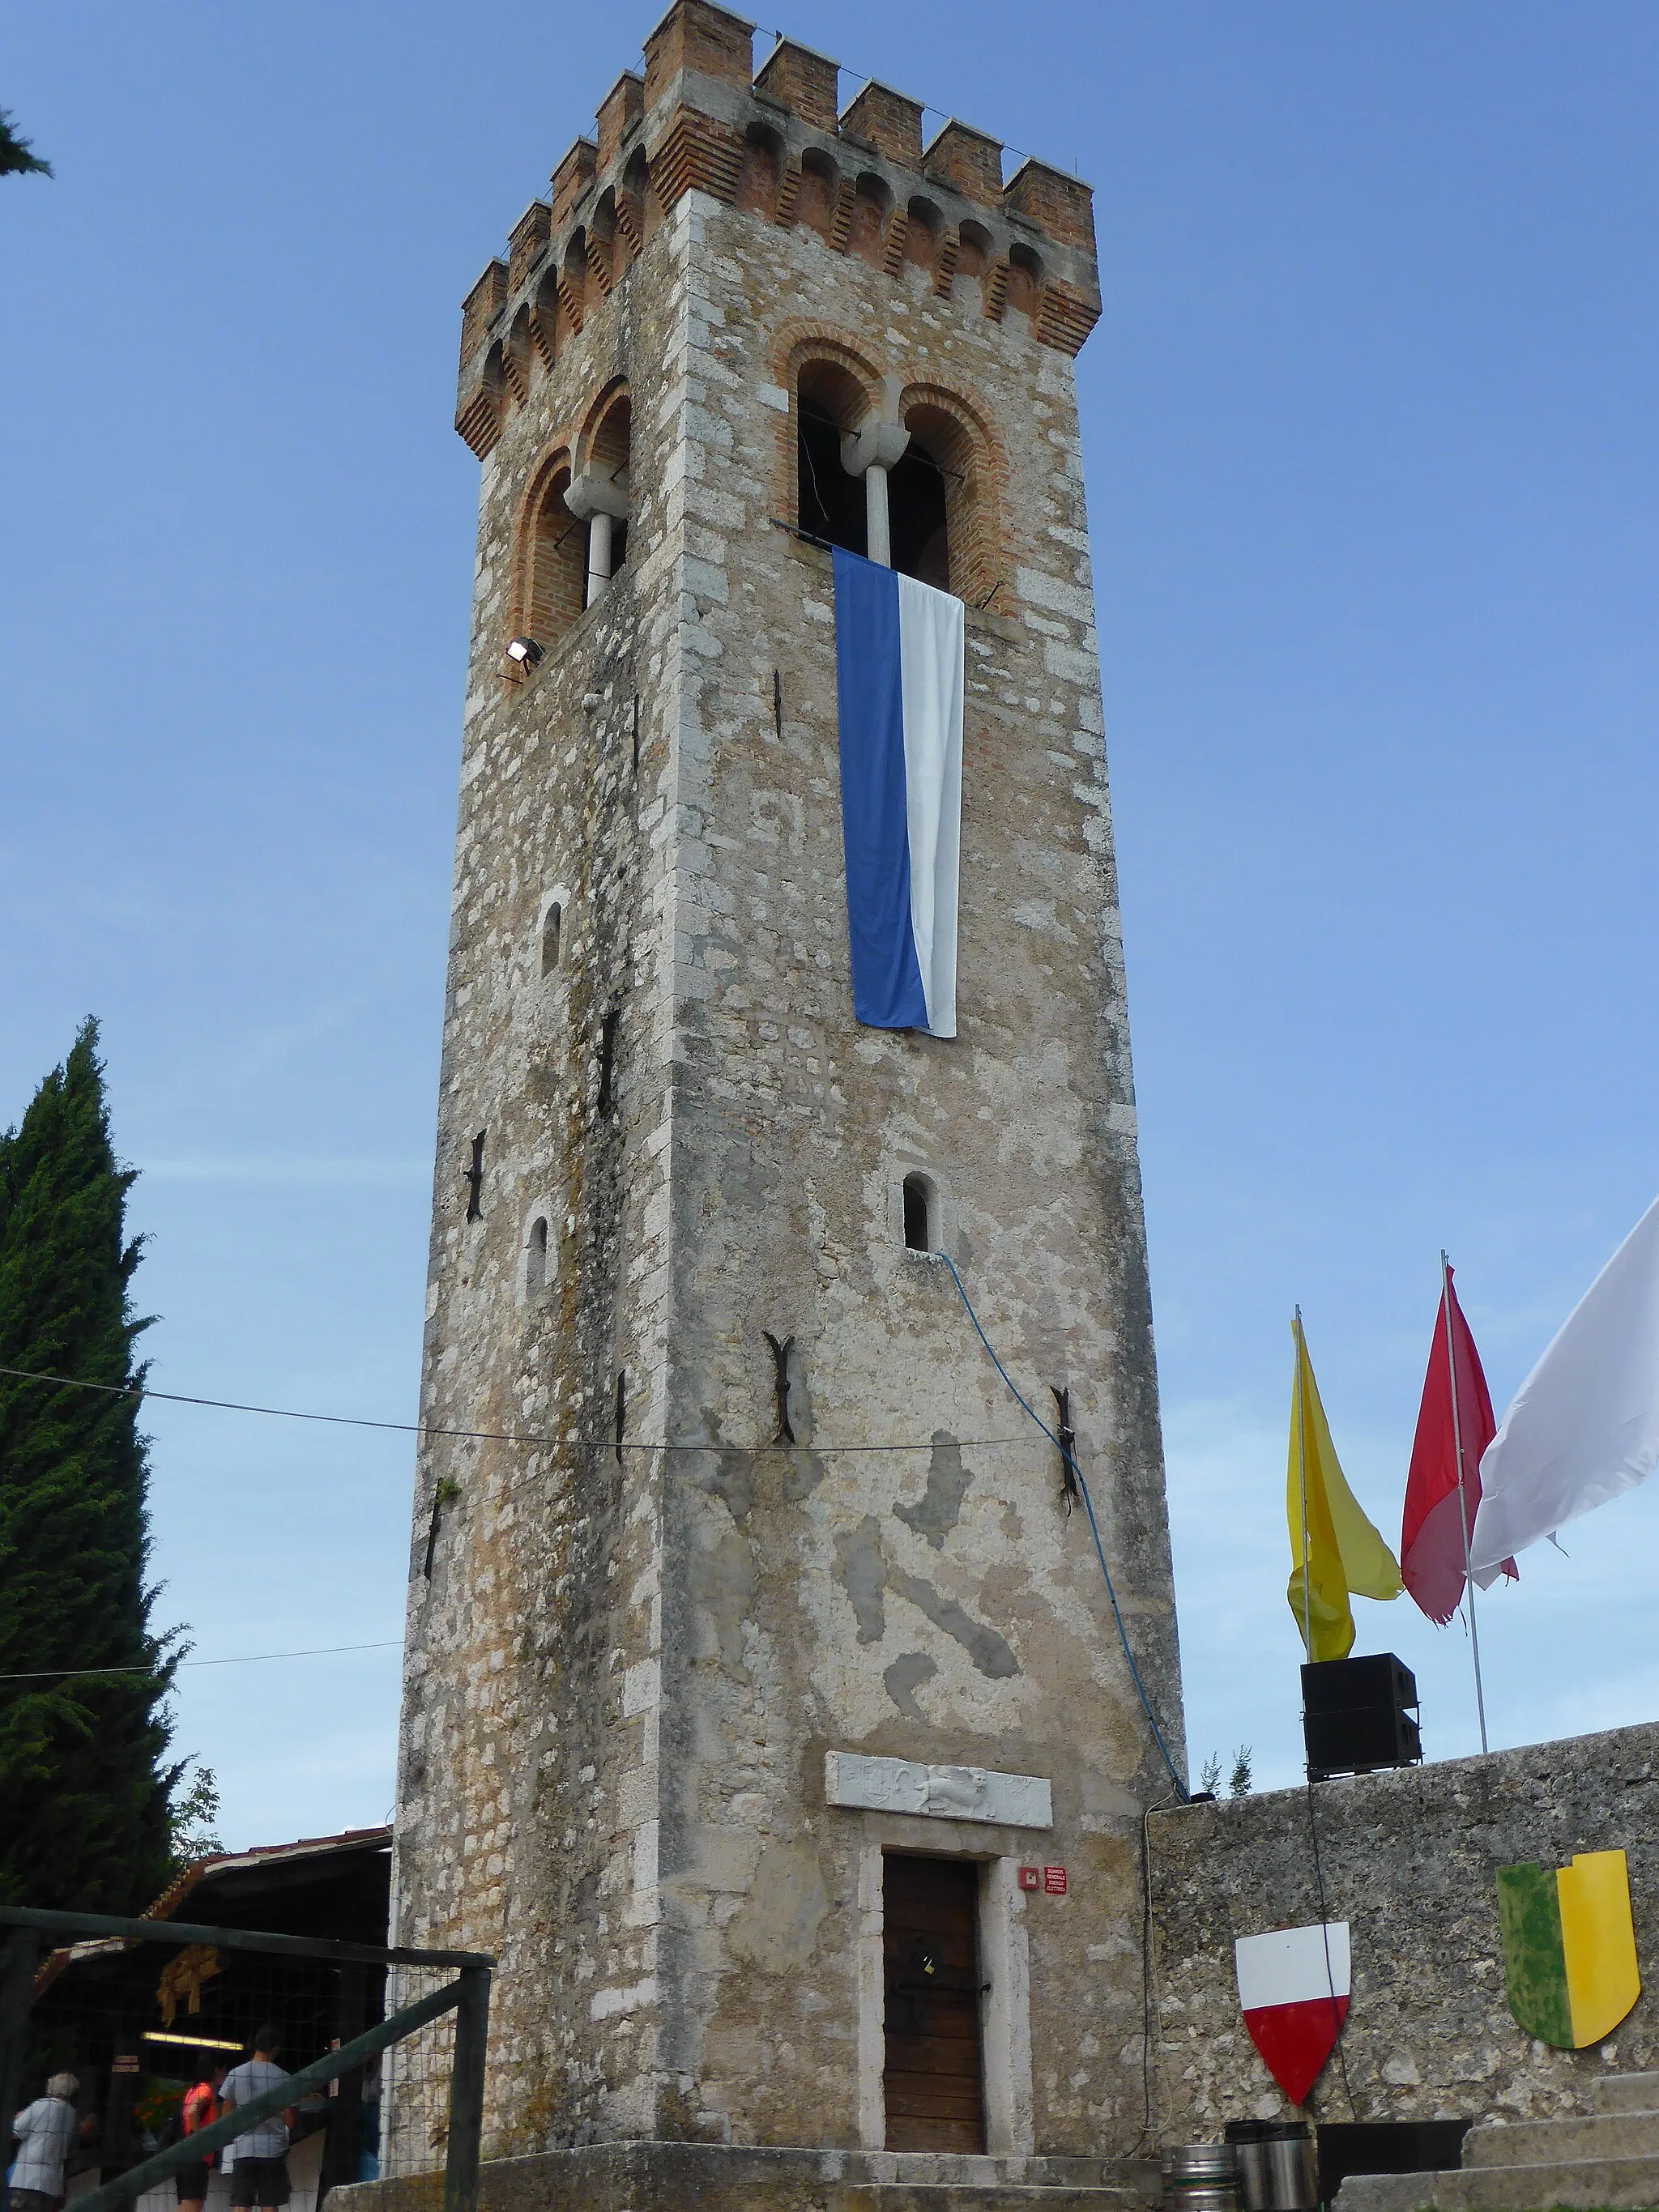 Photo showing: Bell tower (already fortified tower) in Caneva castle, Italy.